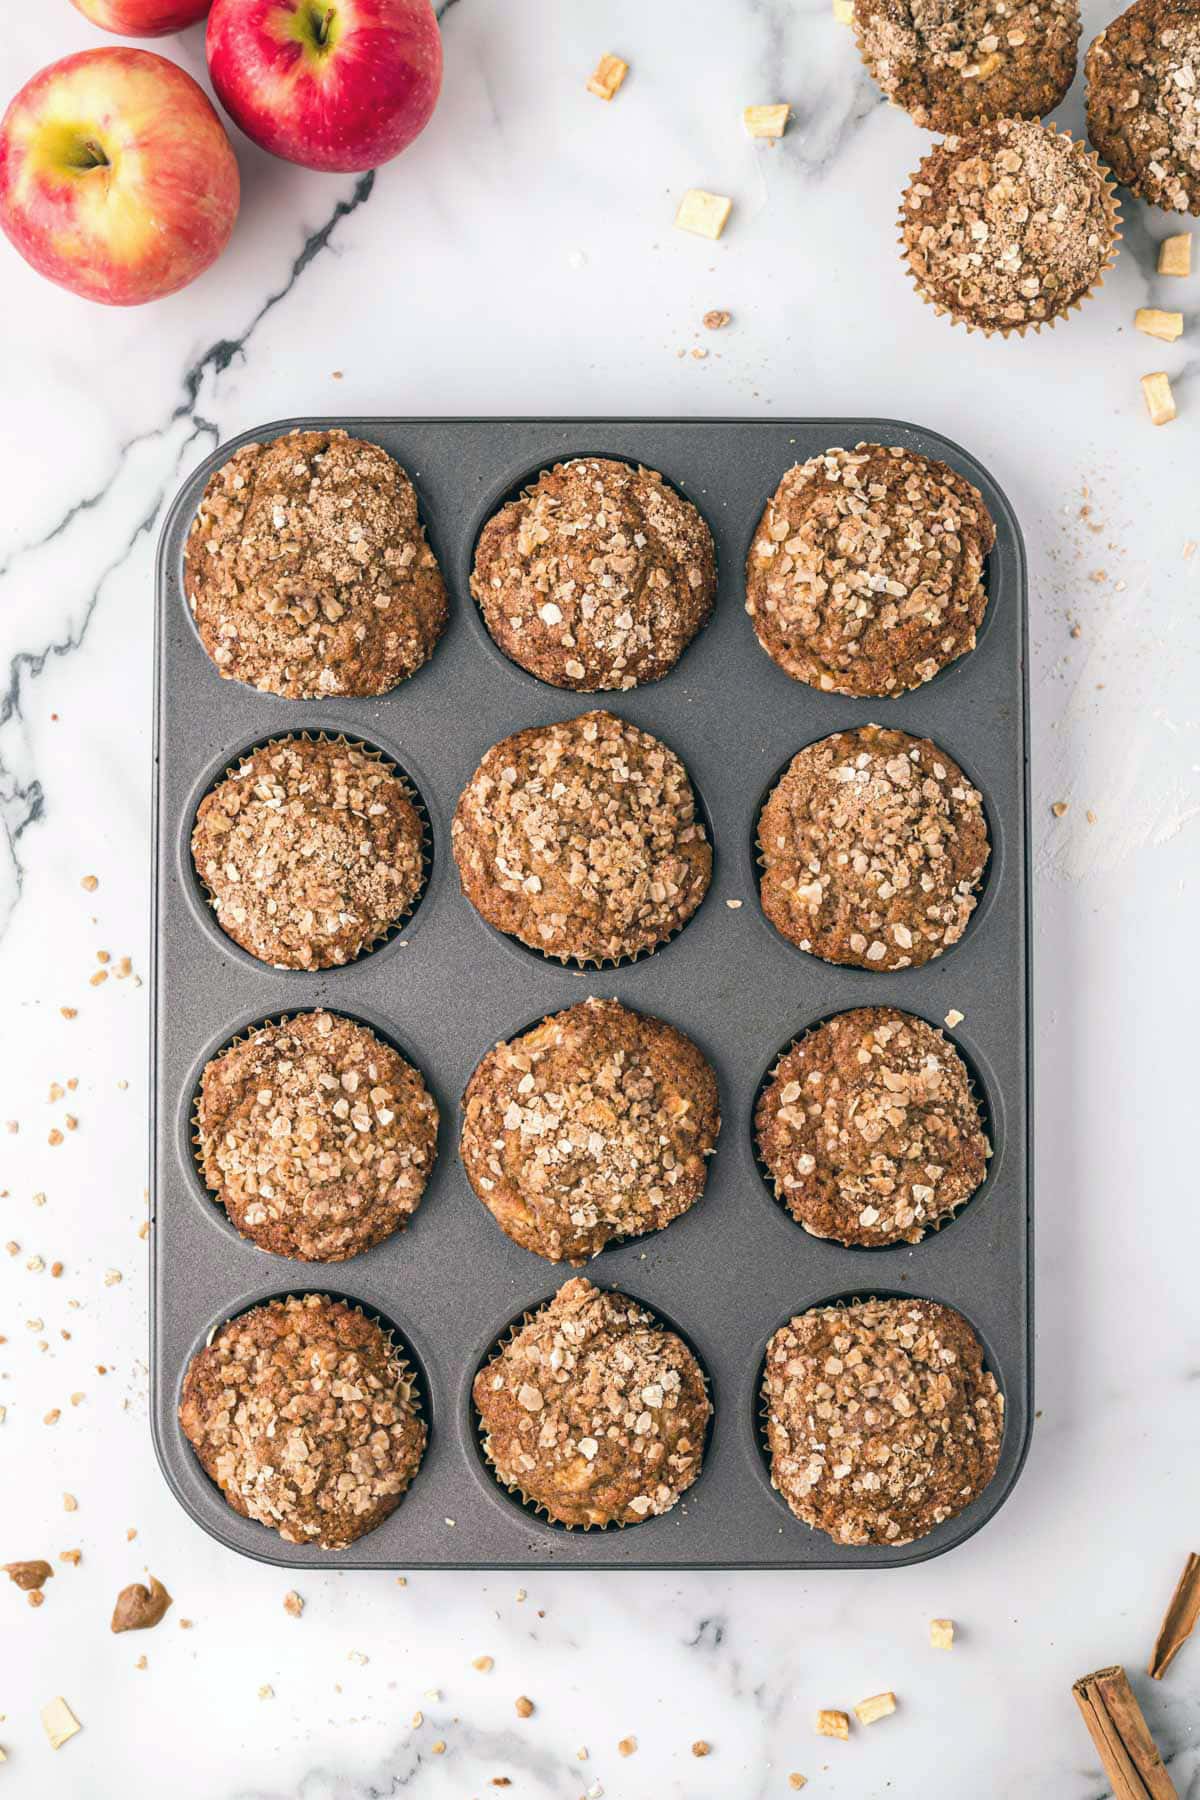 Baked apple muffins in a muffin pan.